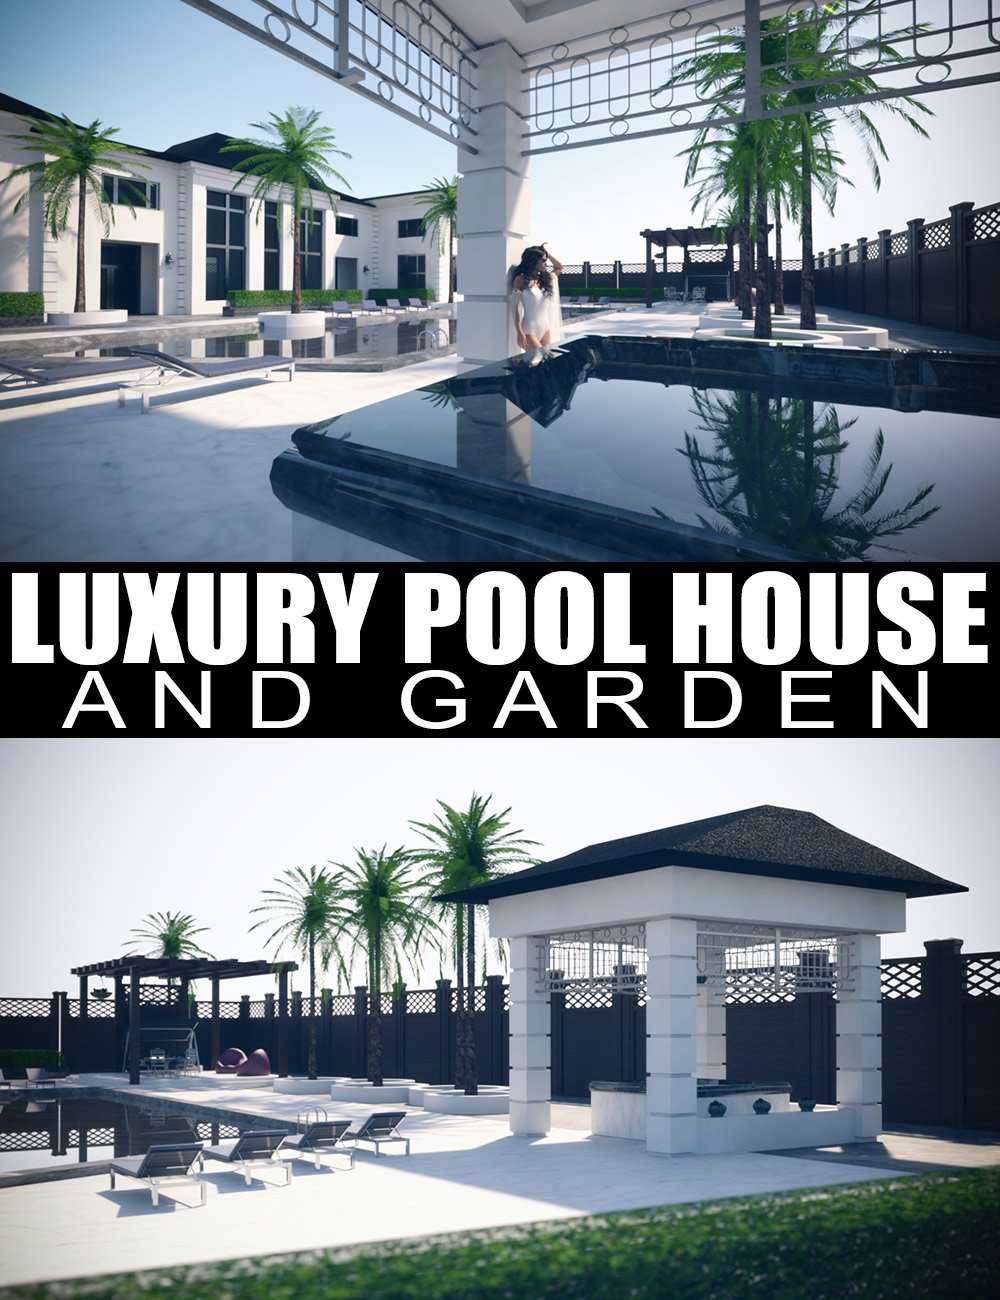 Luxury Pool House and Garden by: Dreamlight, 3D Models by Daz 3D